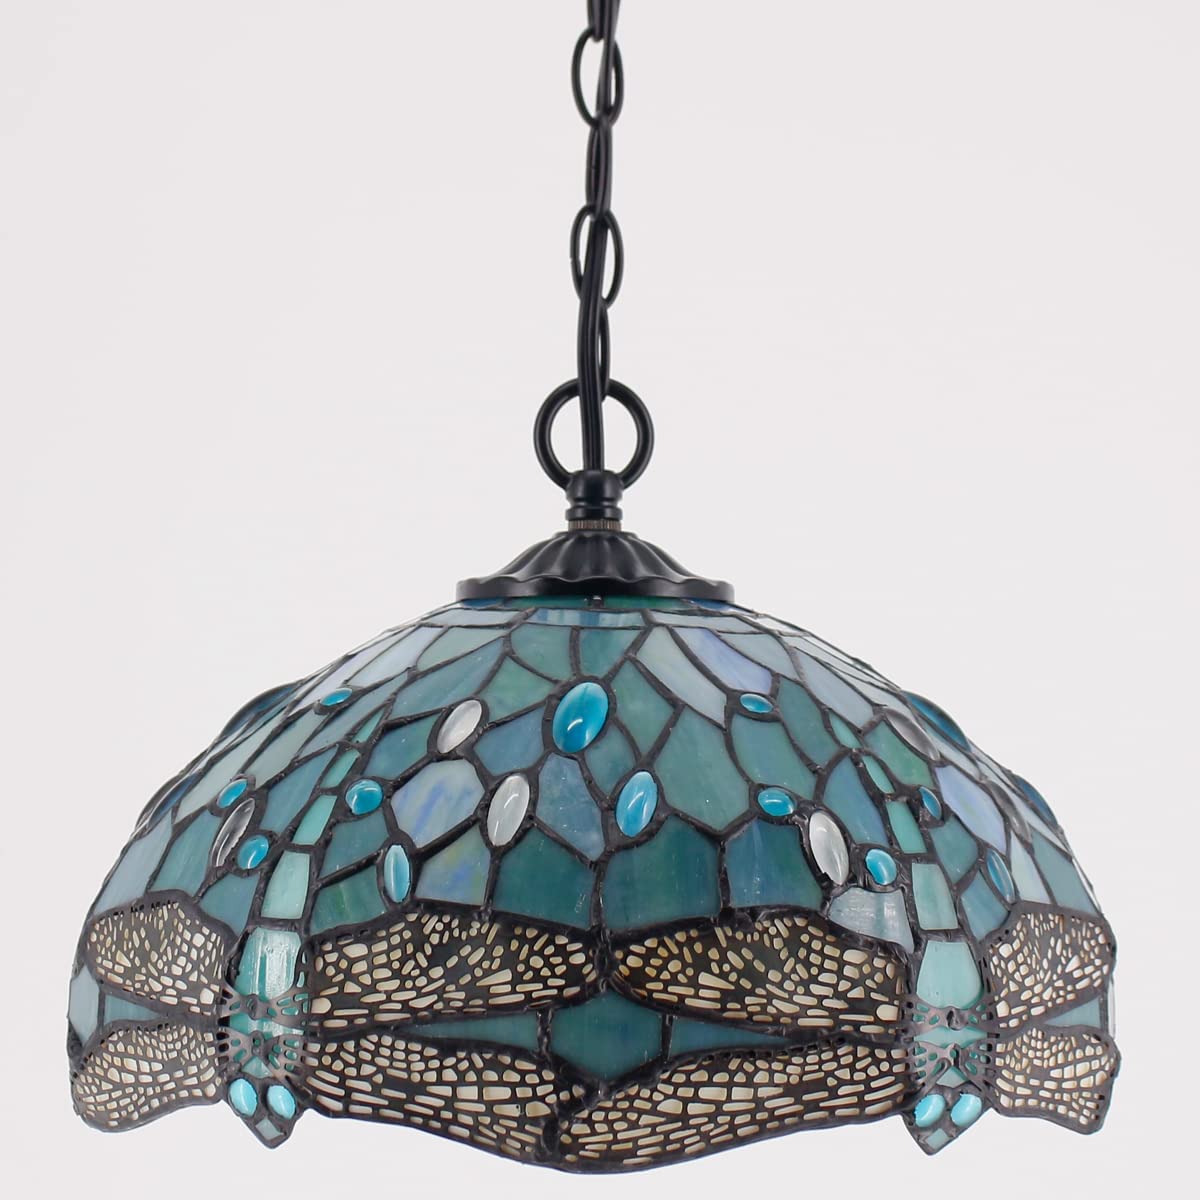 Tiffany Pendant Lamp Plug in Werfactory® Sea Blue Stained Glass Dragonfly 12 Inch Hanging Light